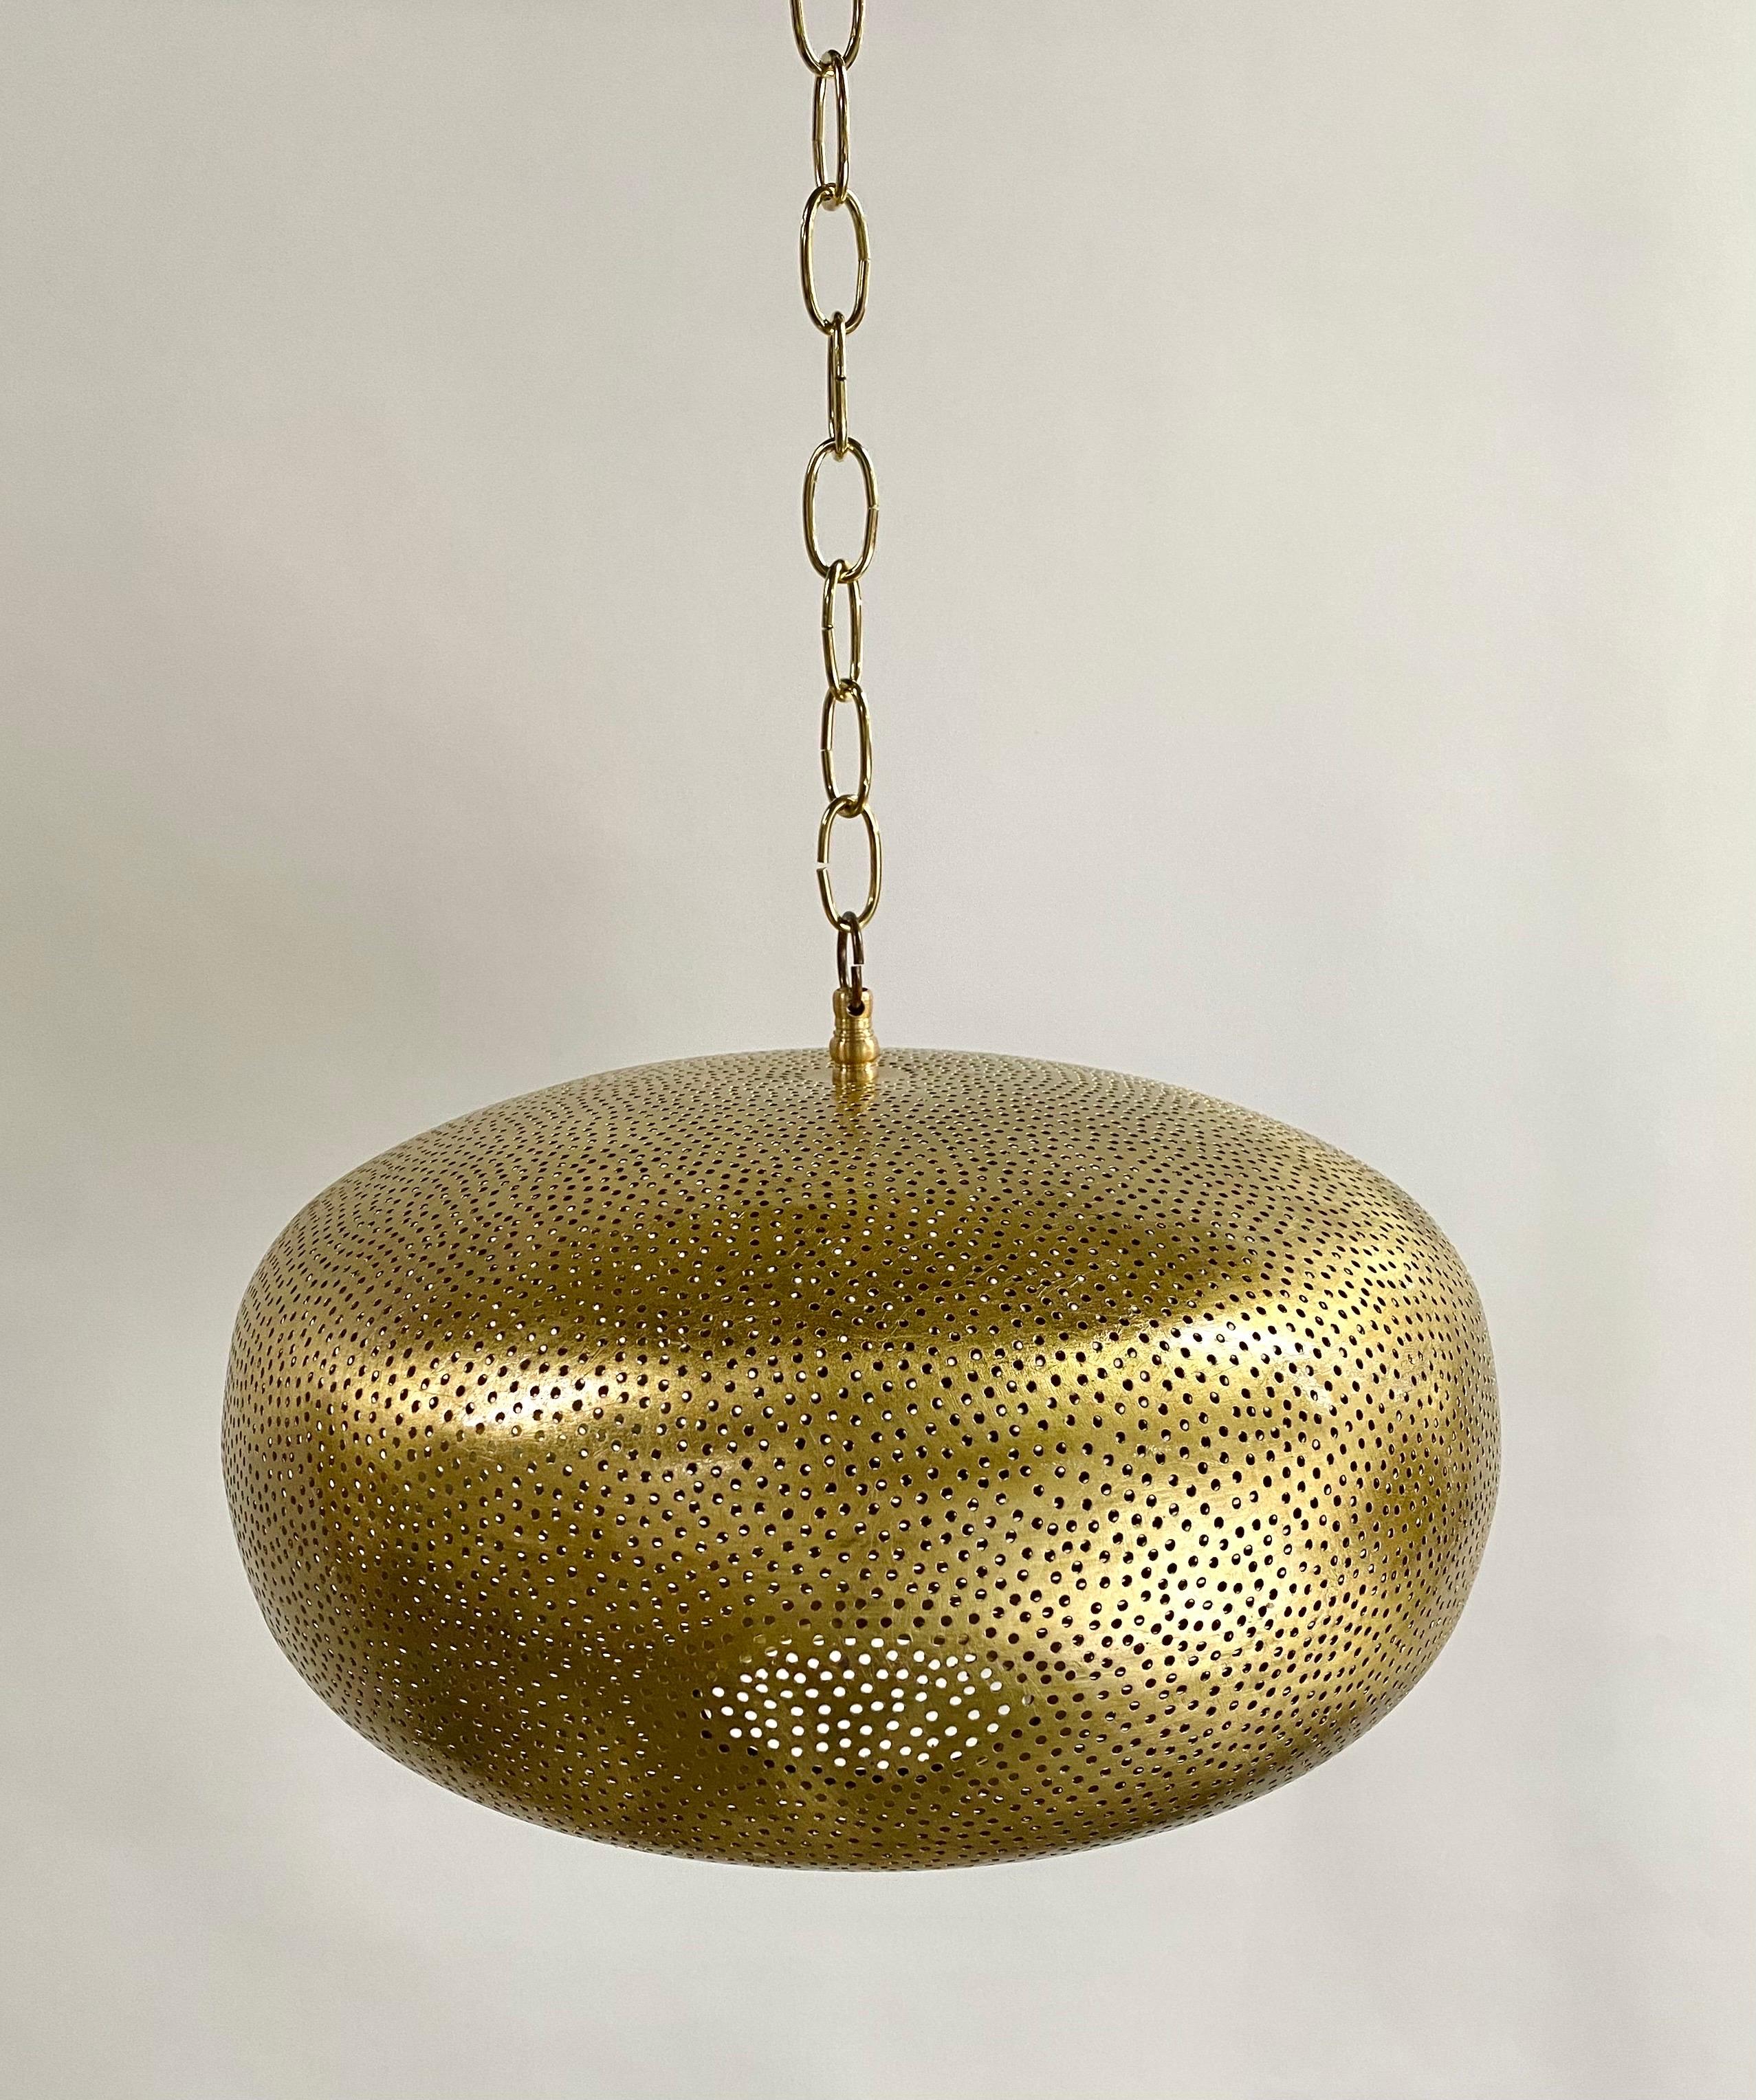 A modern / boho chic brass pendant or chandelier. Featuring hand-tooled brass and further enhanced with an oval retro shape, the pendant or lantern produces a soft ambient lighting perfect for elevating mood and complementing aesthetic harmony,